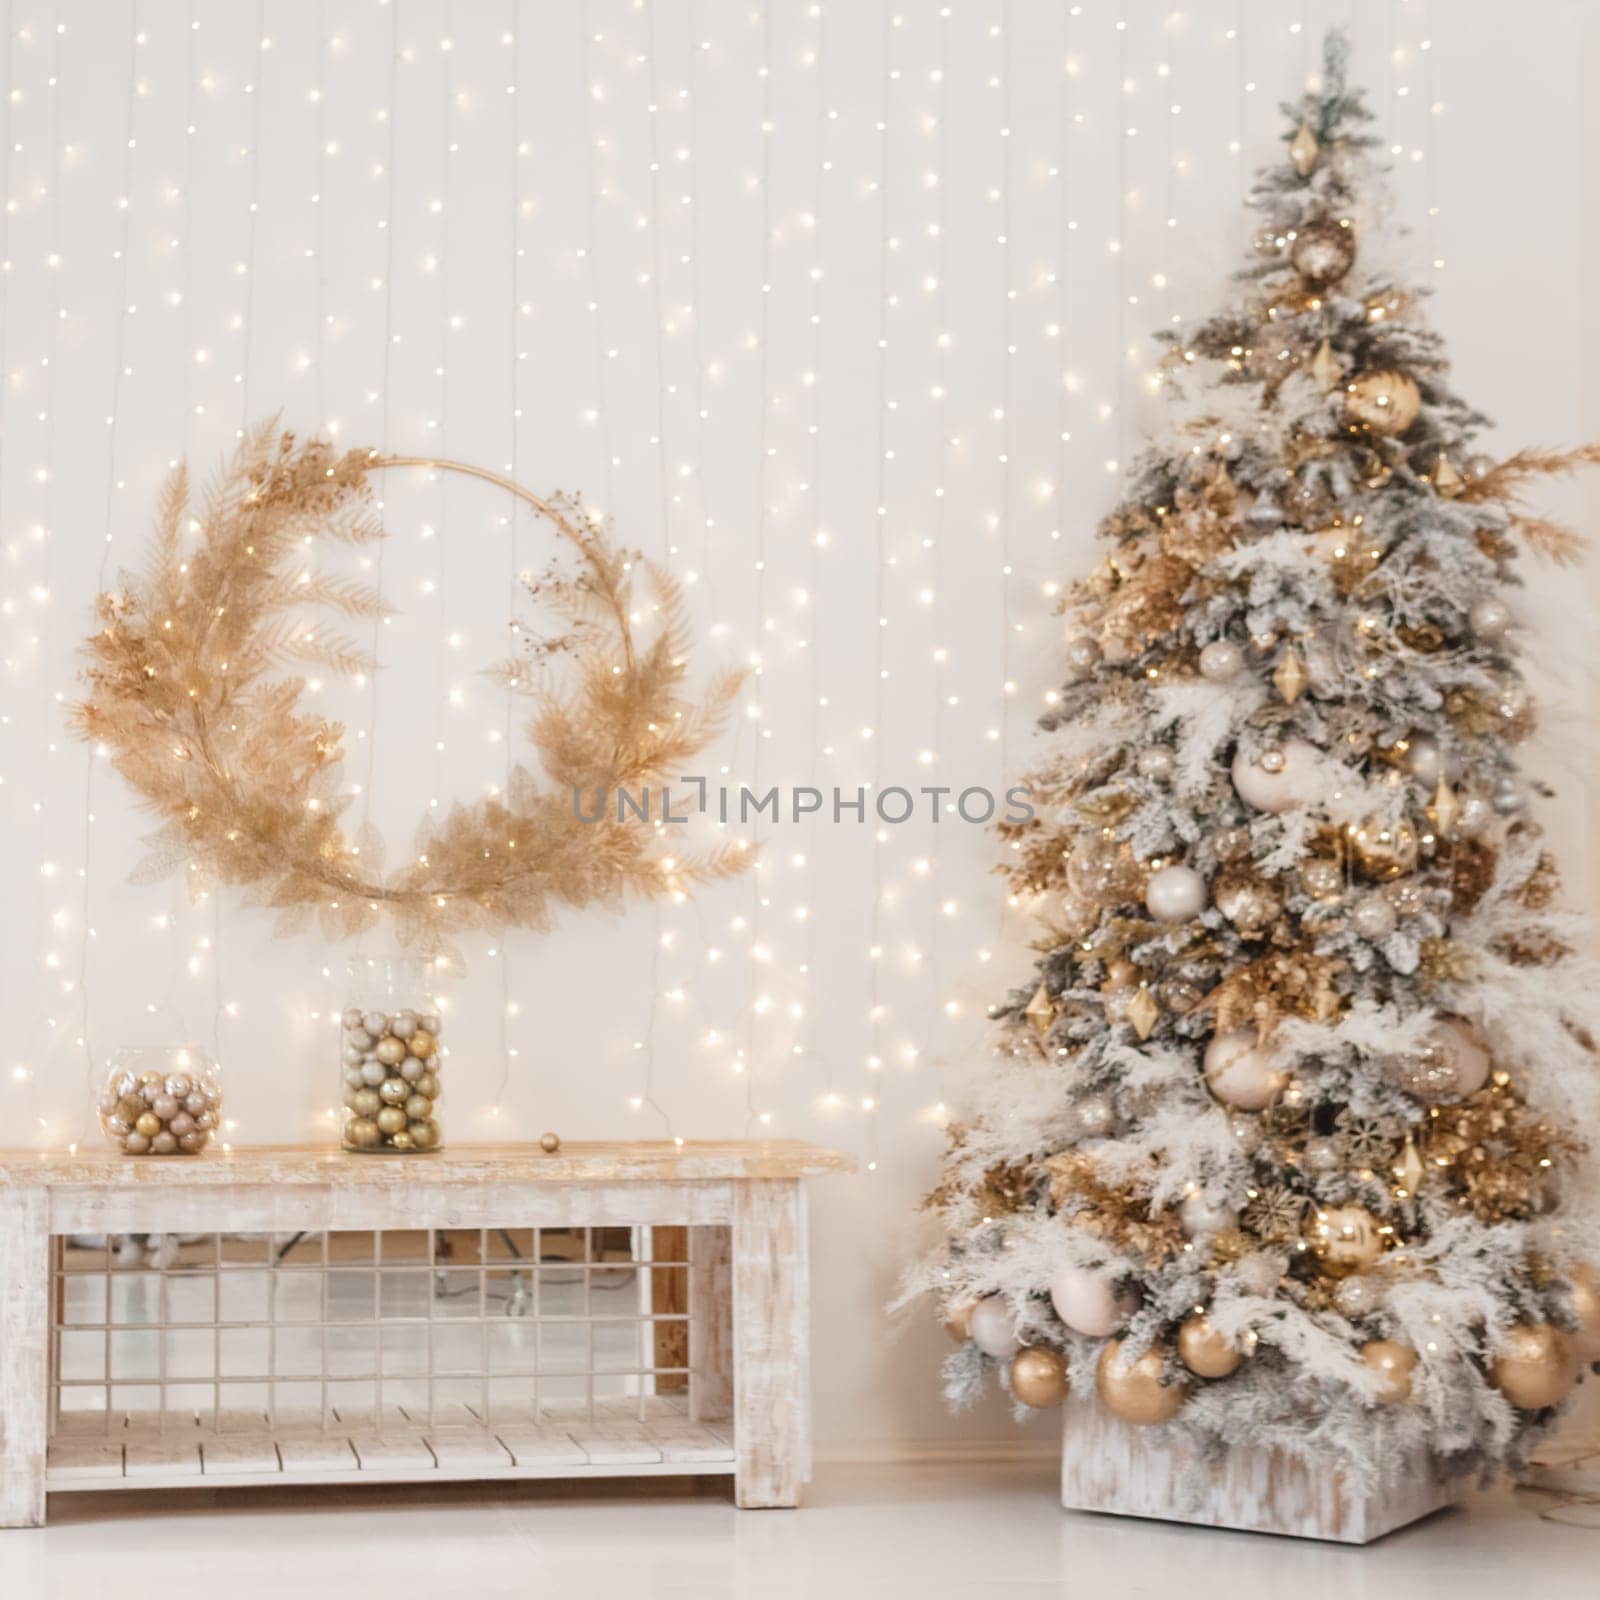 New Year's interior. Christmas tree in a light style and light interior. Festive atmosphere